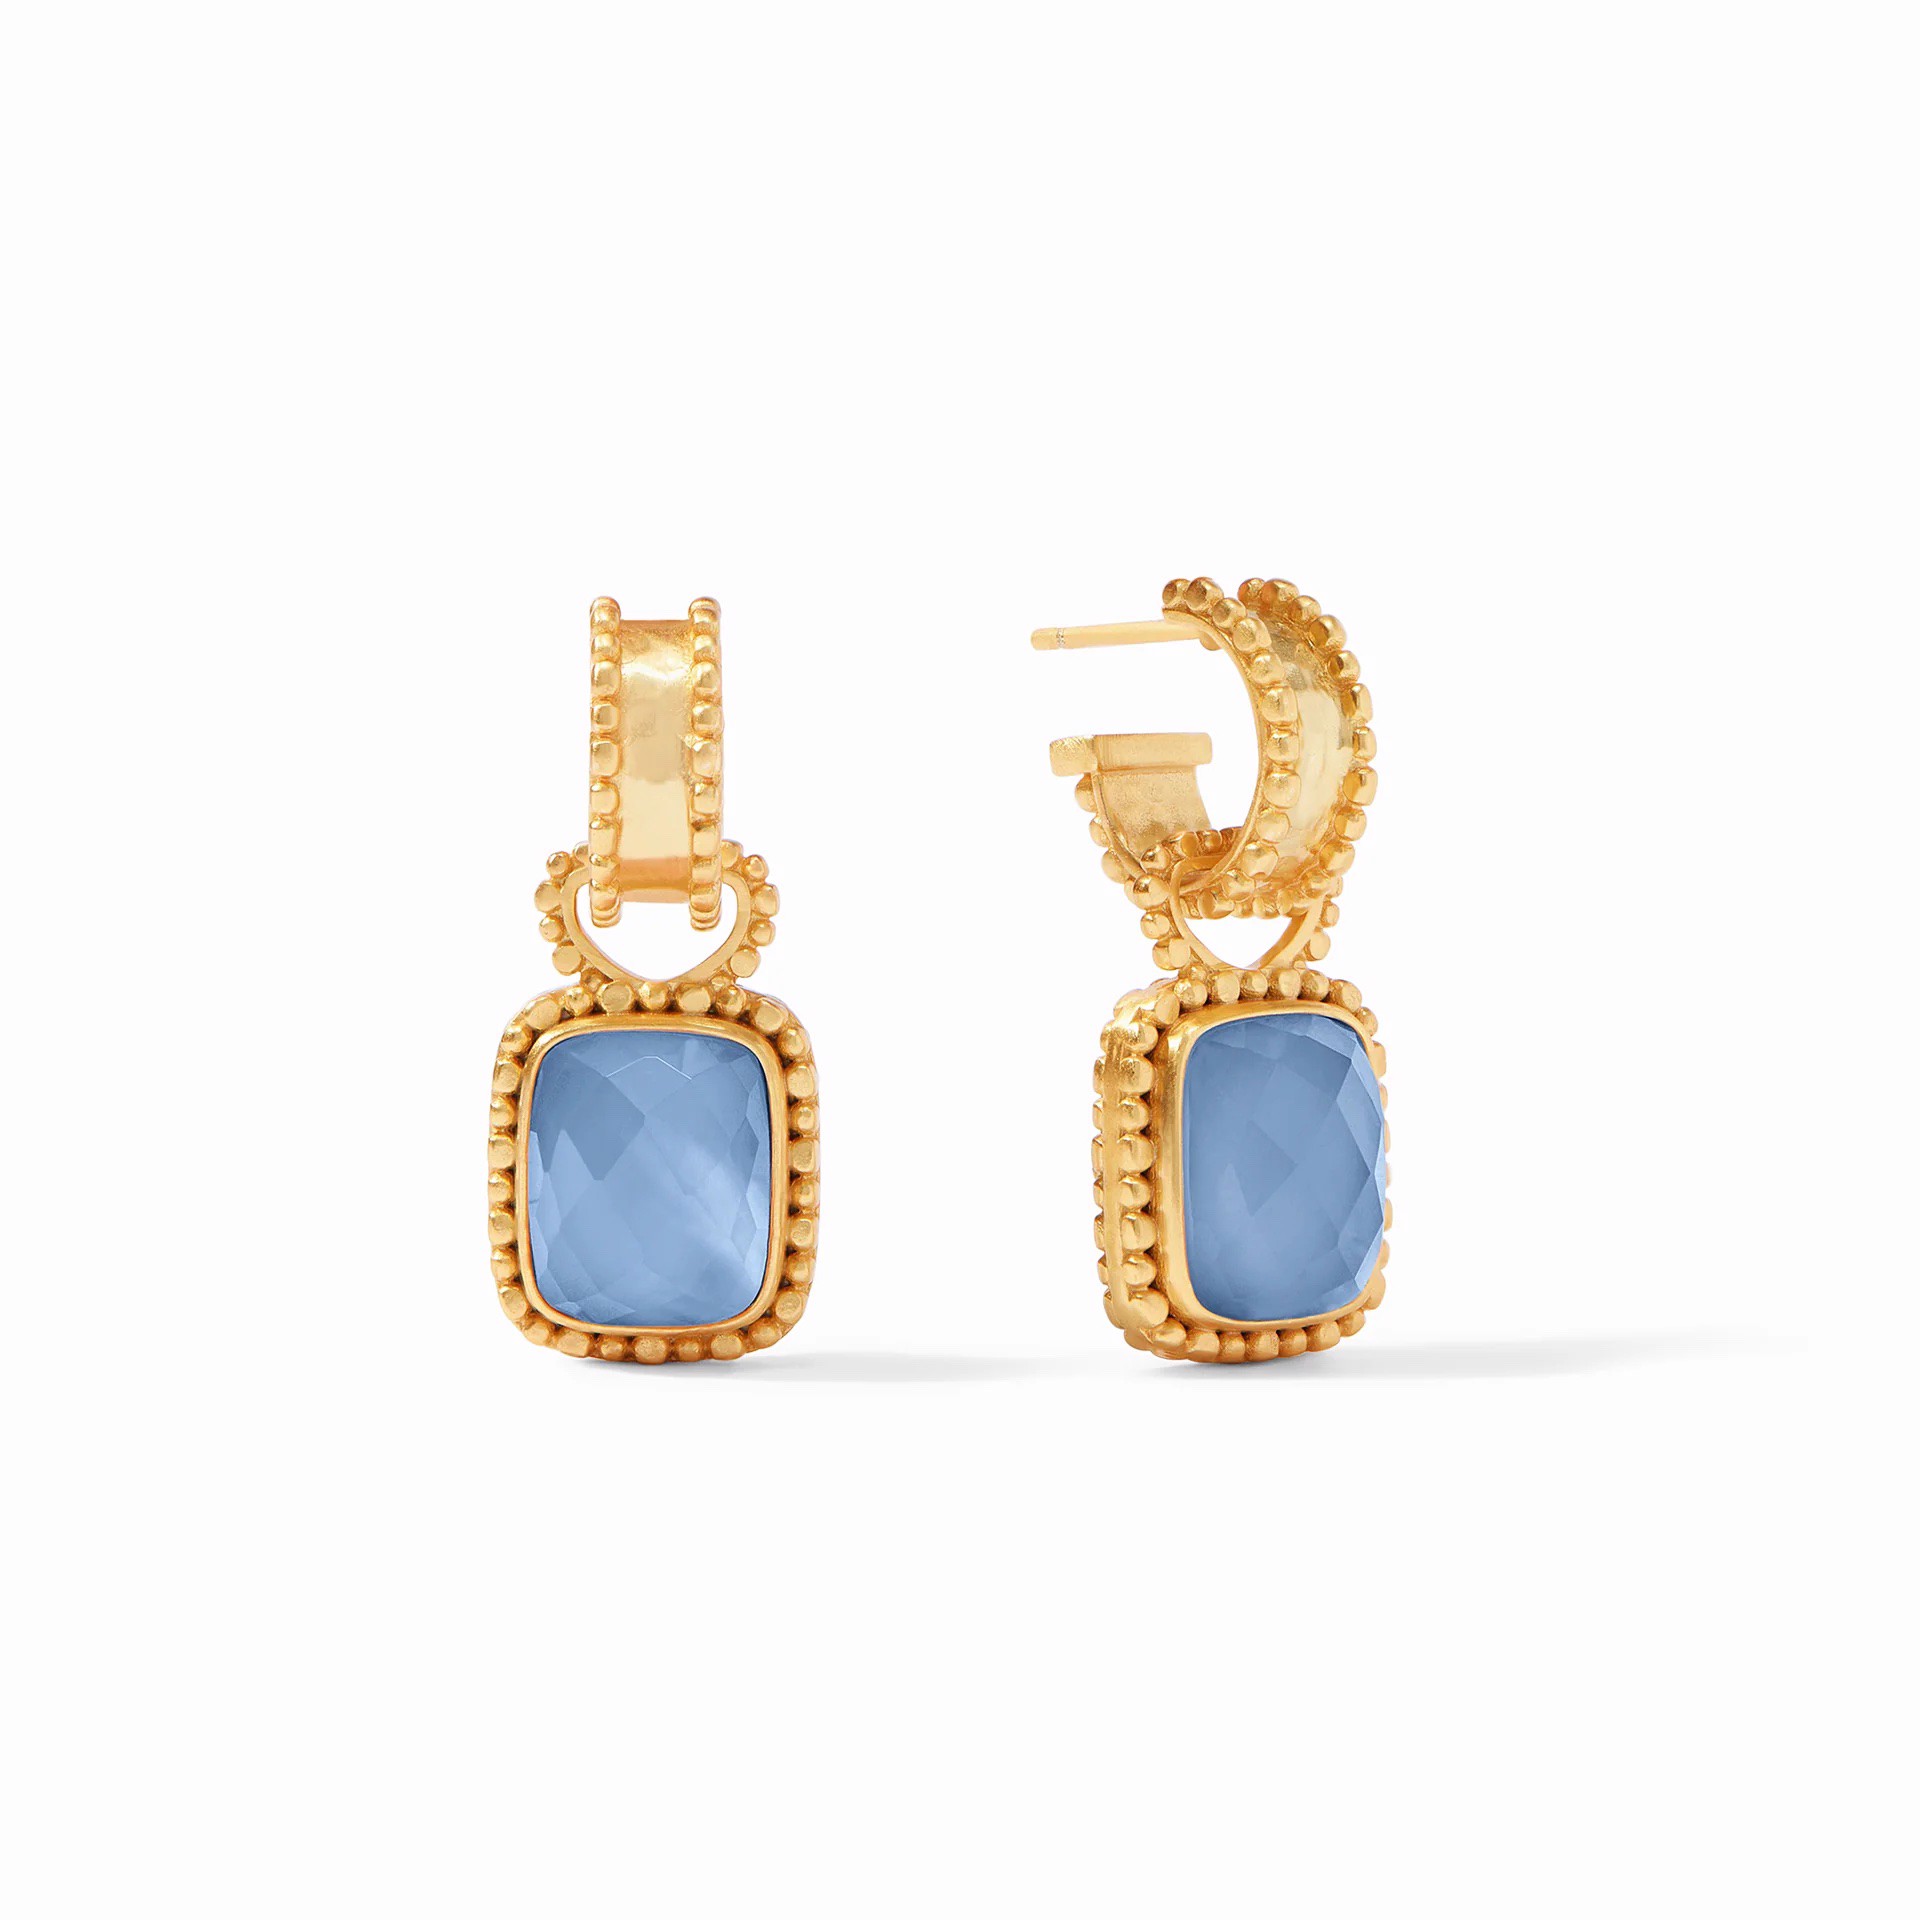 Marbella Hoop and Charm Earring - Chalcedony Blue by Julie Vos